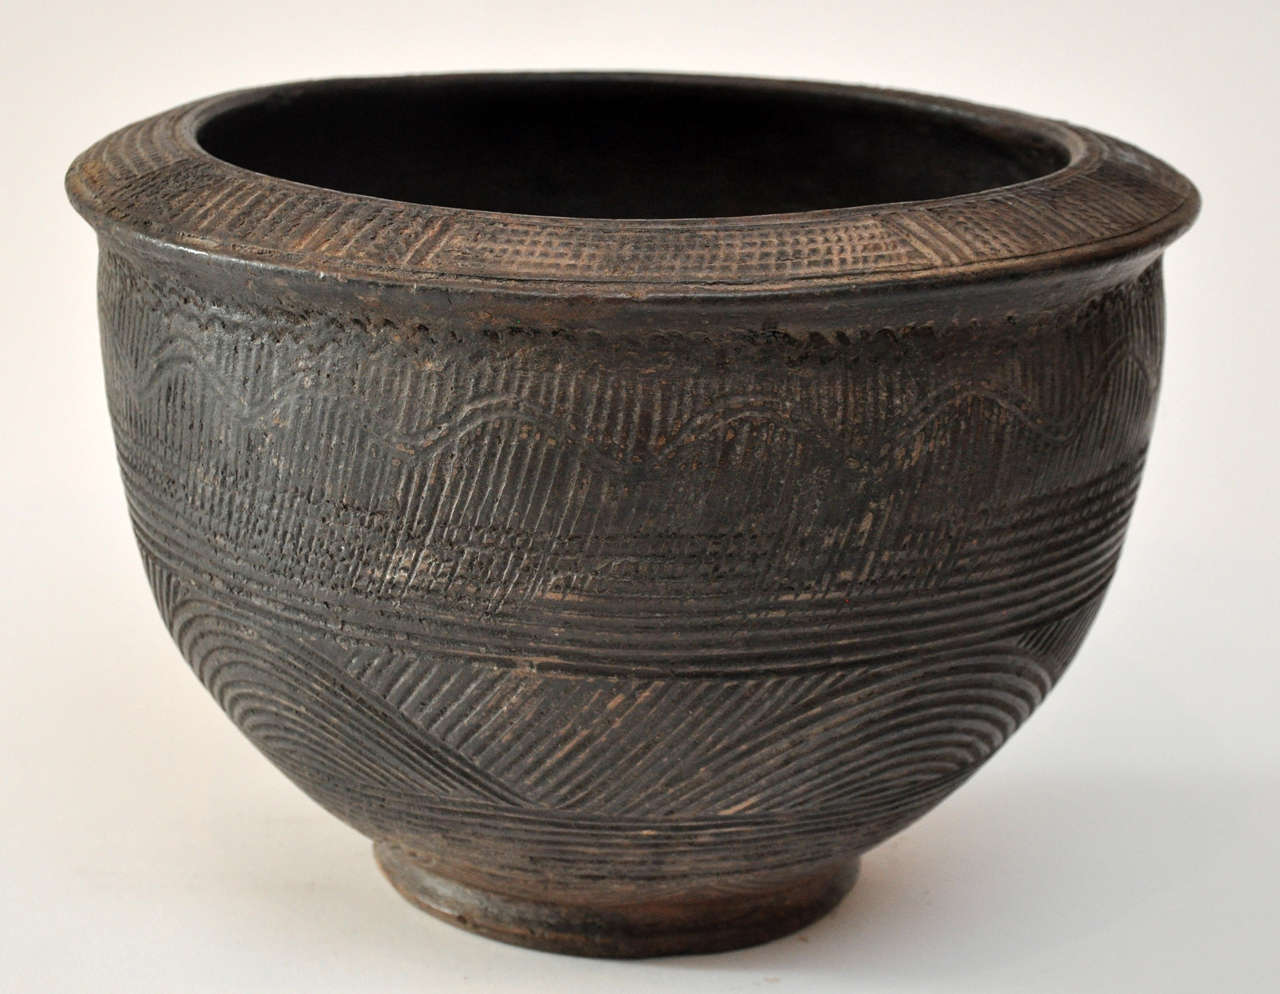 Early 20th Century Nigerian wedding pot. 
Gorgeous etched pot with classic design and engravings